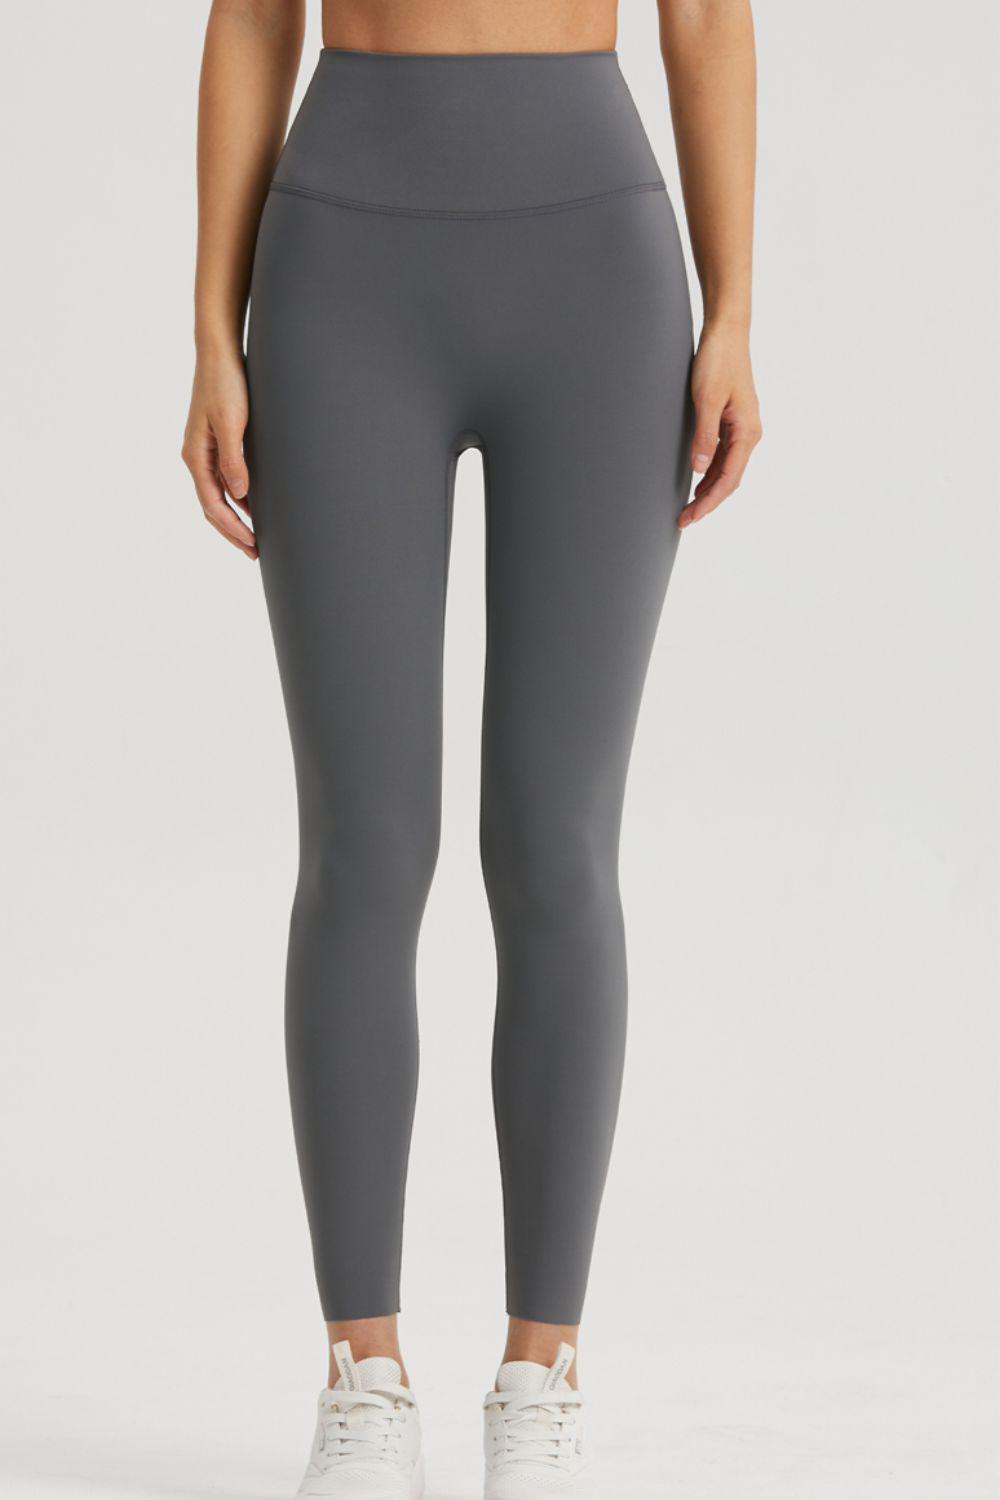 Wide Waistband Sports Leggings-BOTTOM SIZES SMALL MEDIUM LARGE-[Adult]-[Female]-Charcoal-4-2022 Online Blue Zone Planet